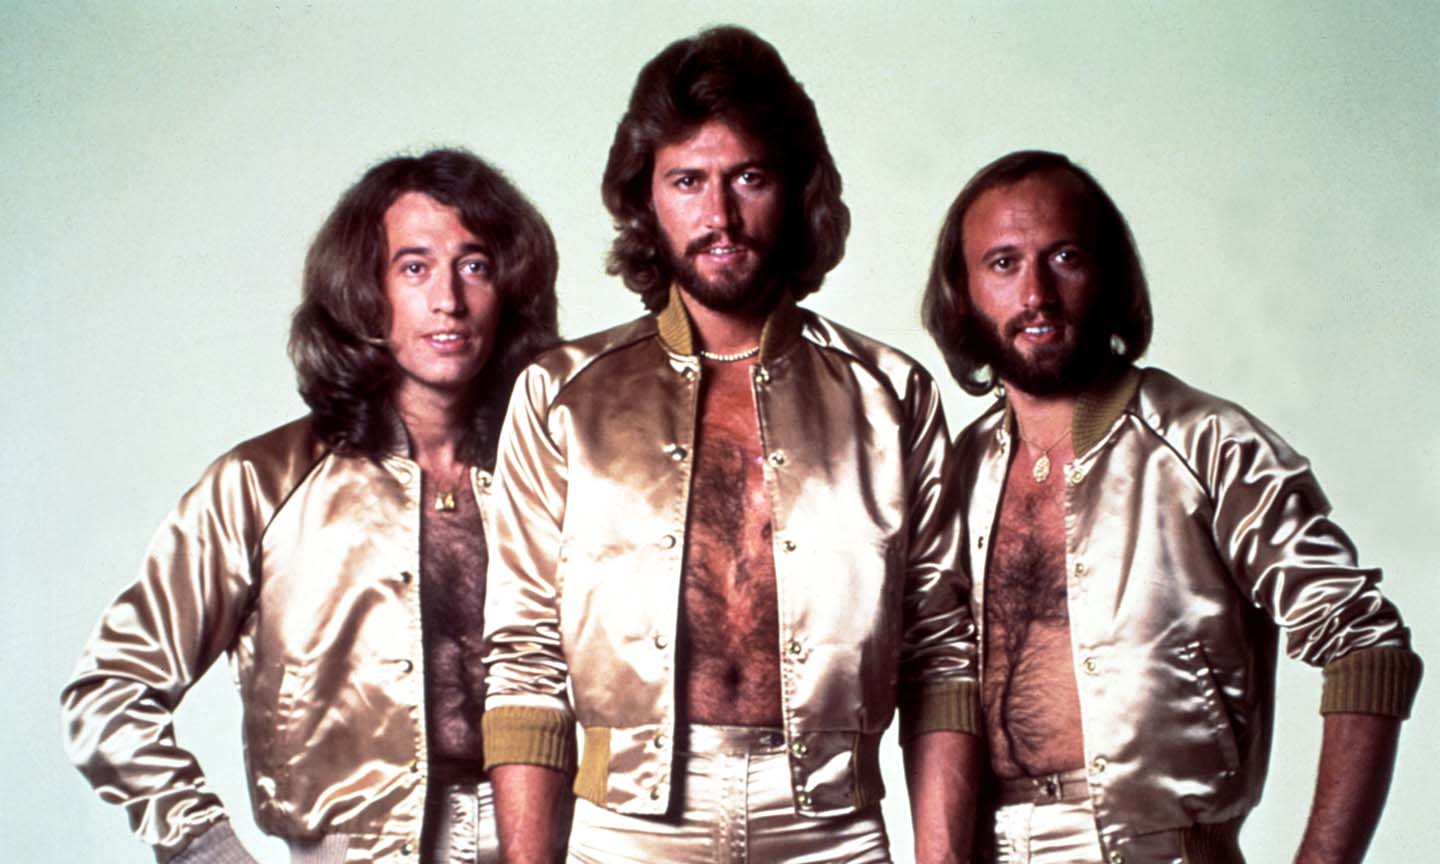 https://www.udiscovermusic.com/wp-content/uploads/2021/11/Bee-Gees-GettyImages-74251400.jpg